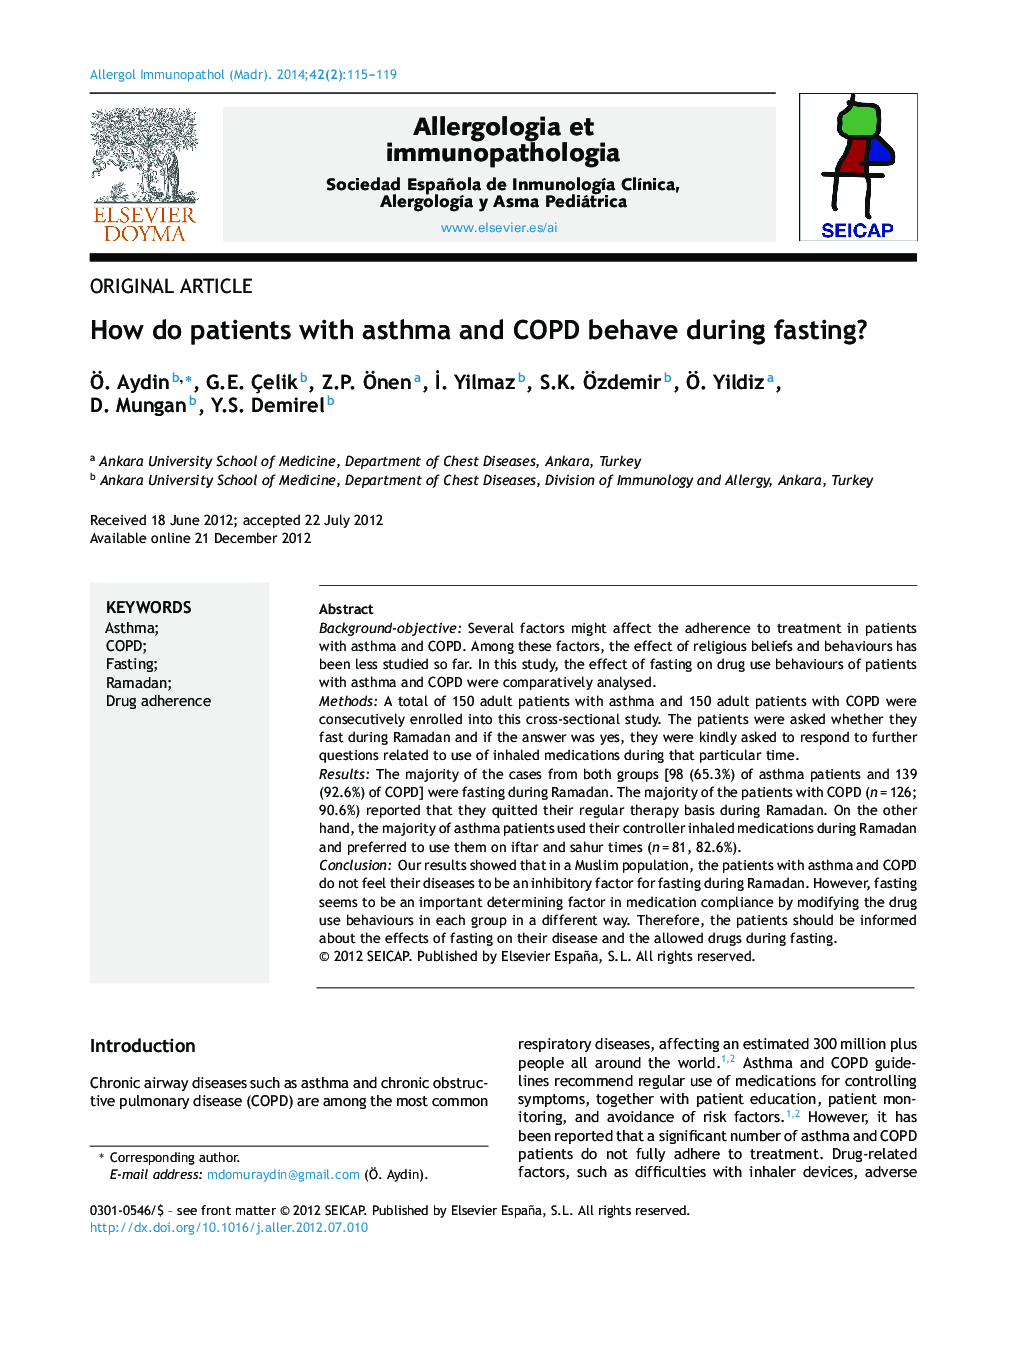 How do patients with asthma and COPD behave during fasting?